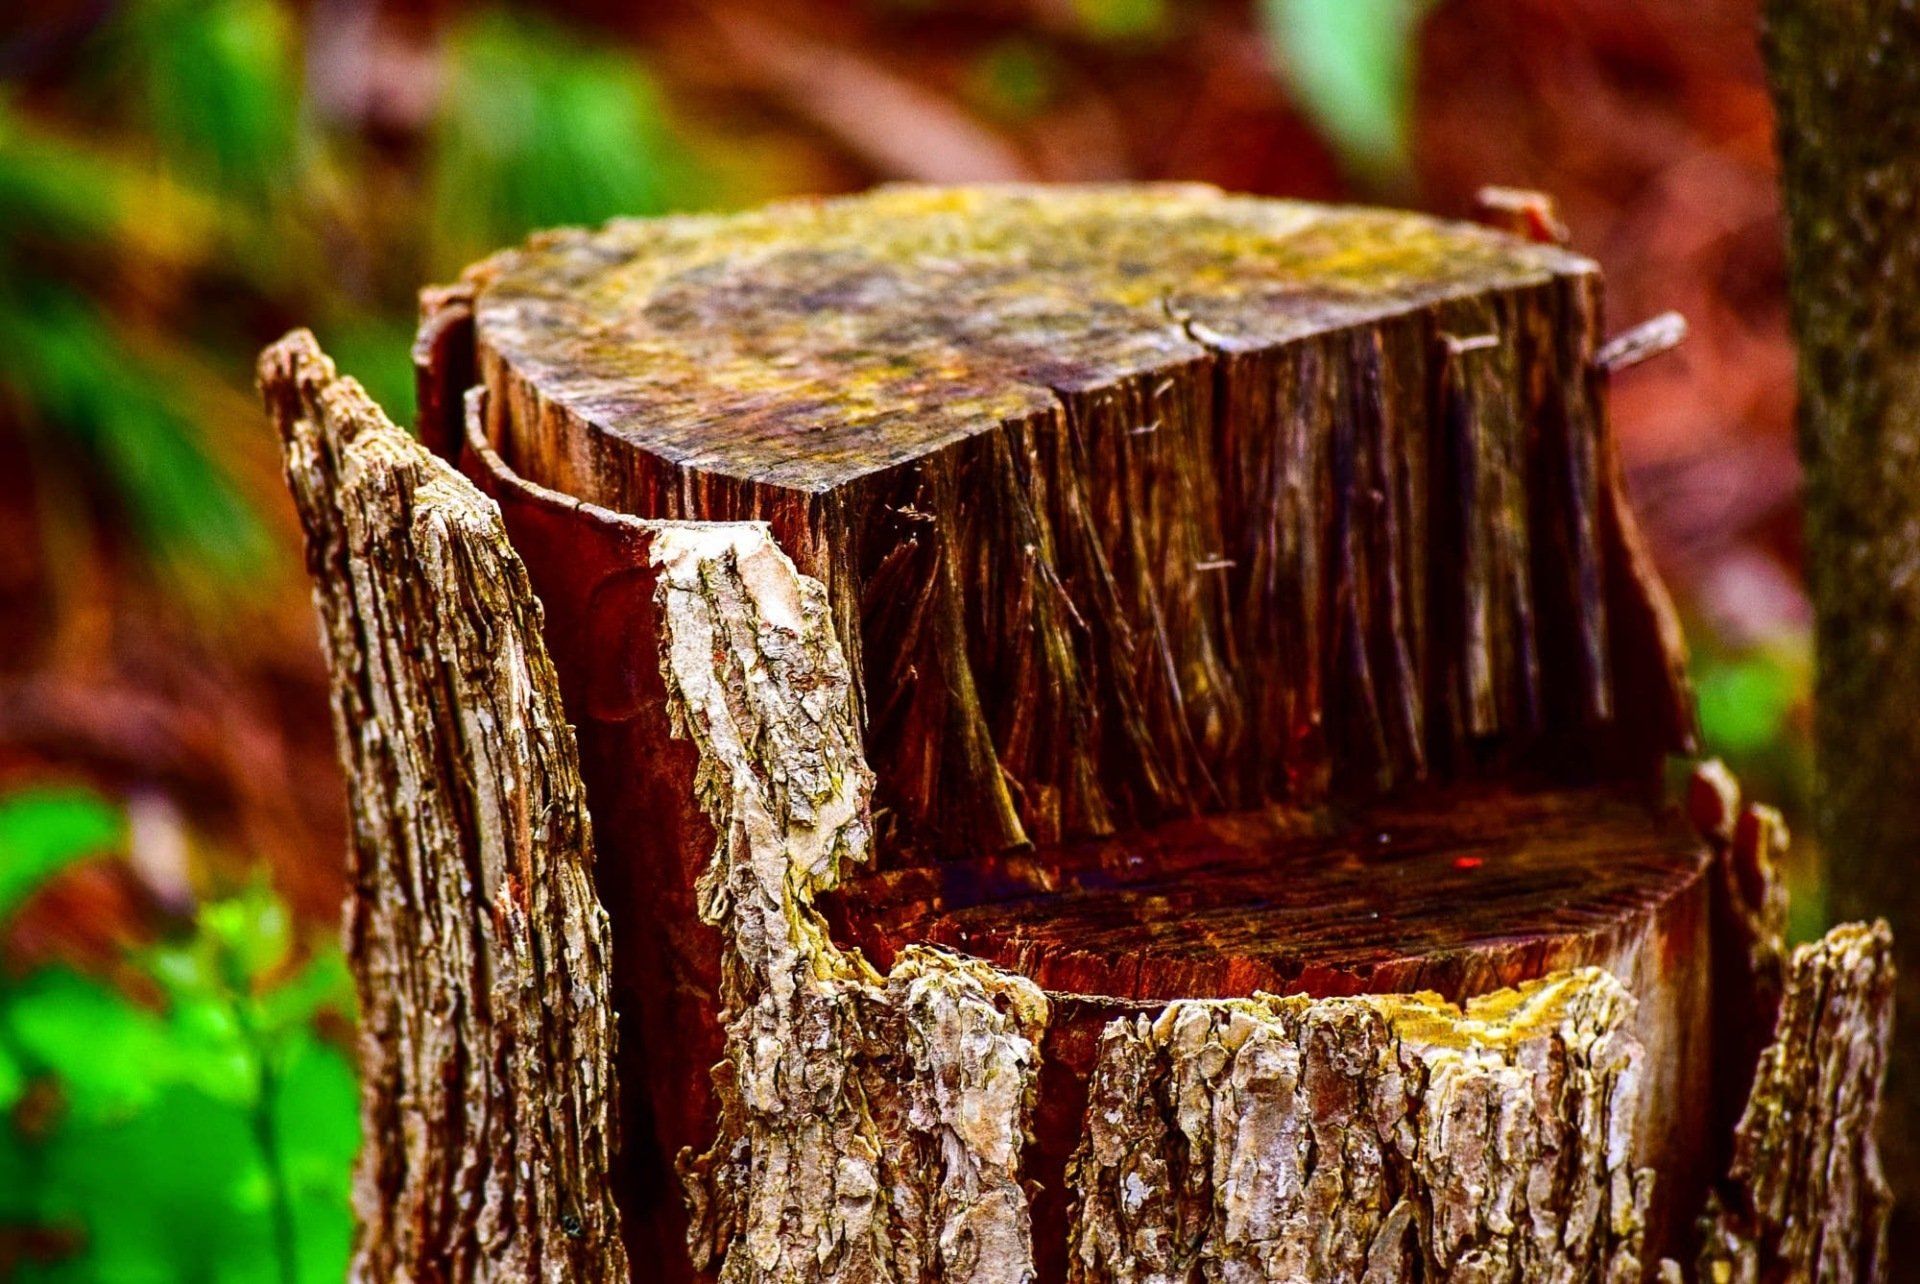 A close up of a tree stump in the woods.